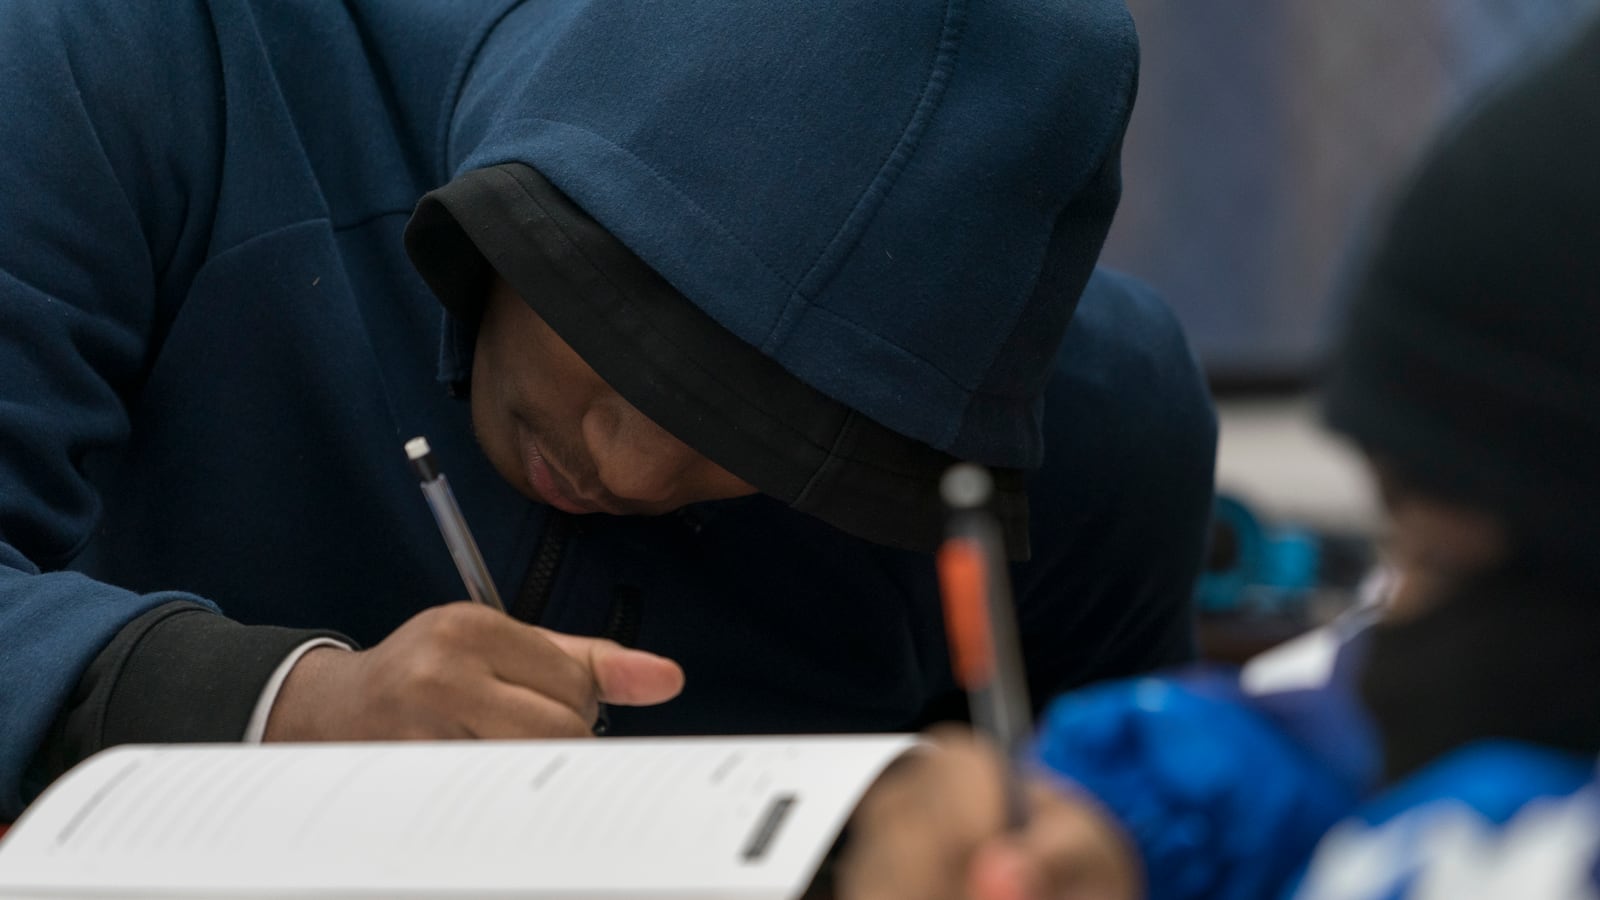 A student with a hood over their head writes into a instructional book.